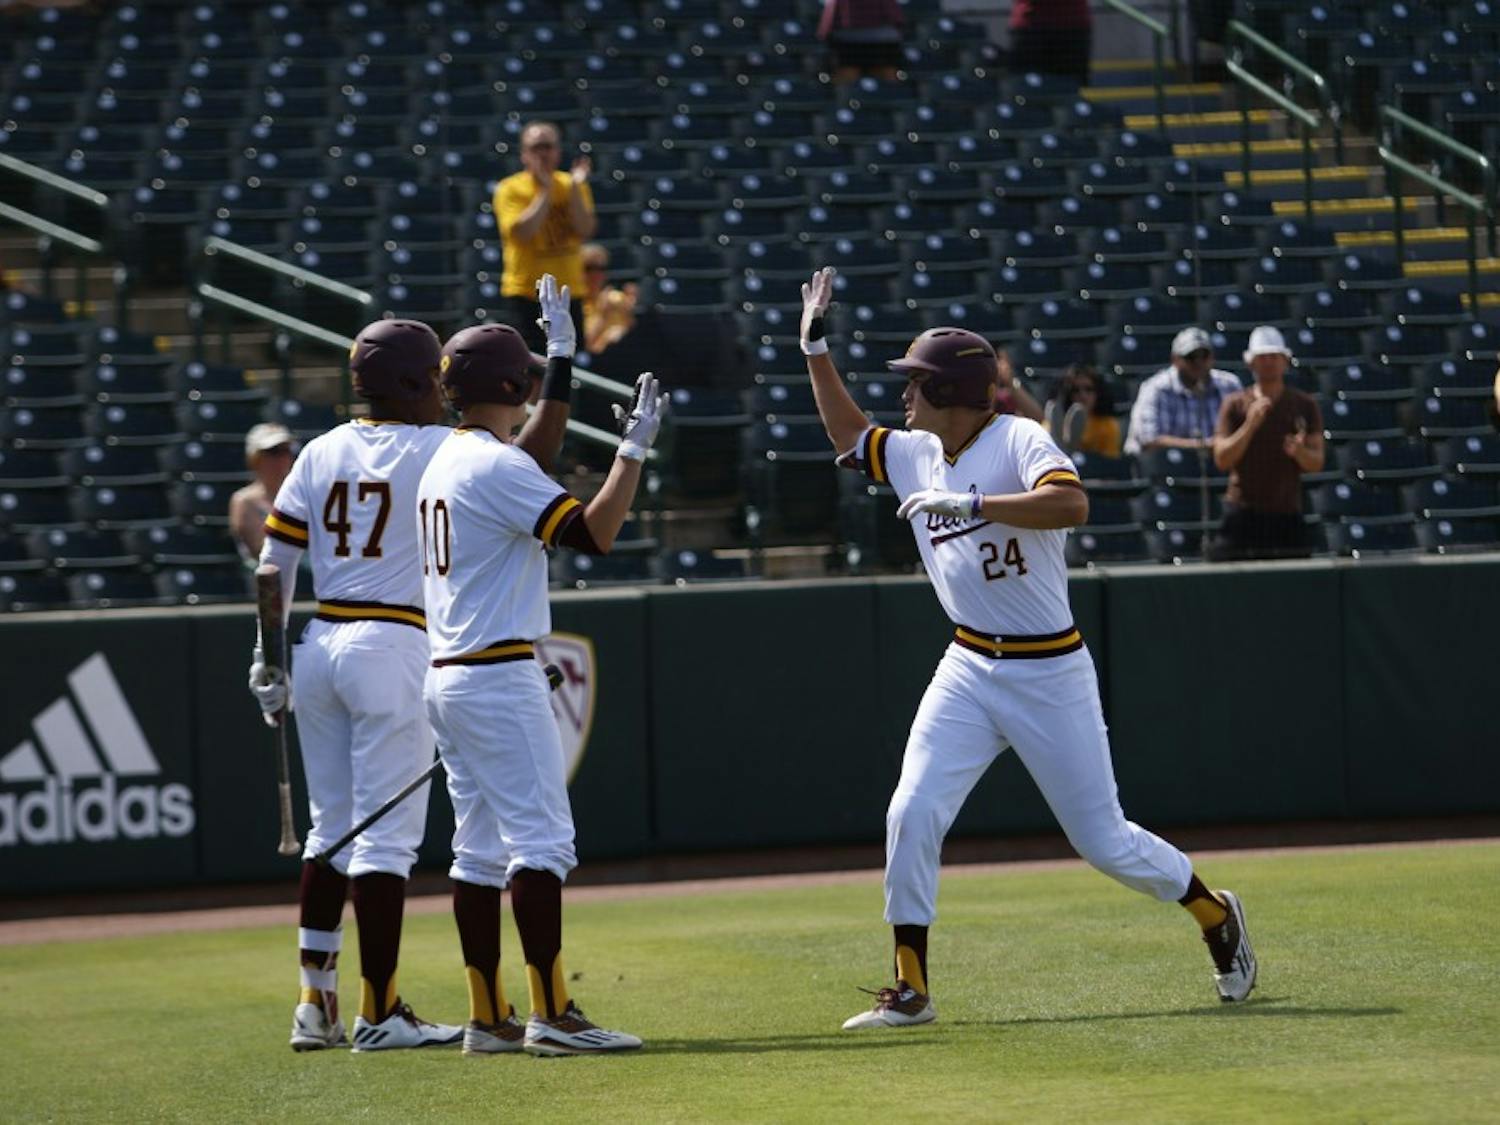 ASU freshman outfielder Hunter Bishop celebrates with his teammates after hitting a home run in a baseball game versus CSU Bakersfield at the Phoenix Municipal Stadium in Tempe, Arizona on Sunday, April 23, 2017. The Sun Devils lost 8-6.